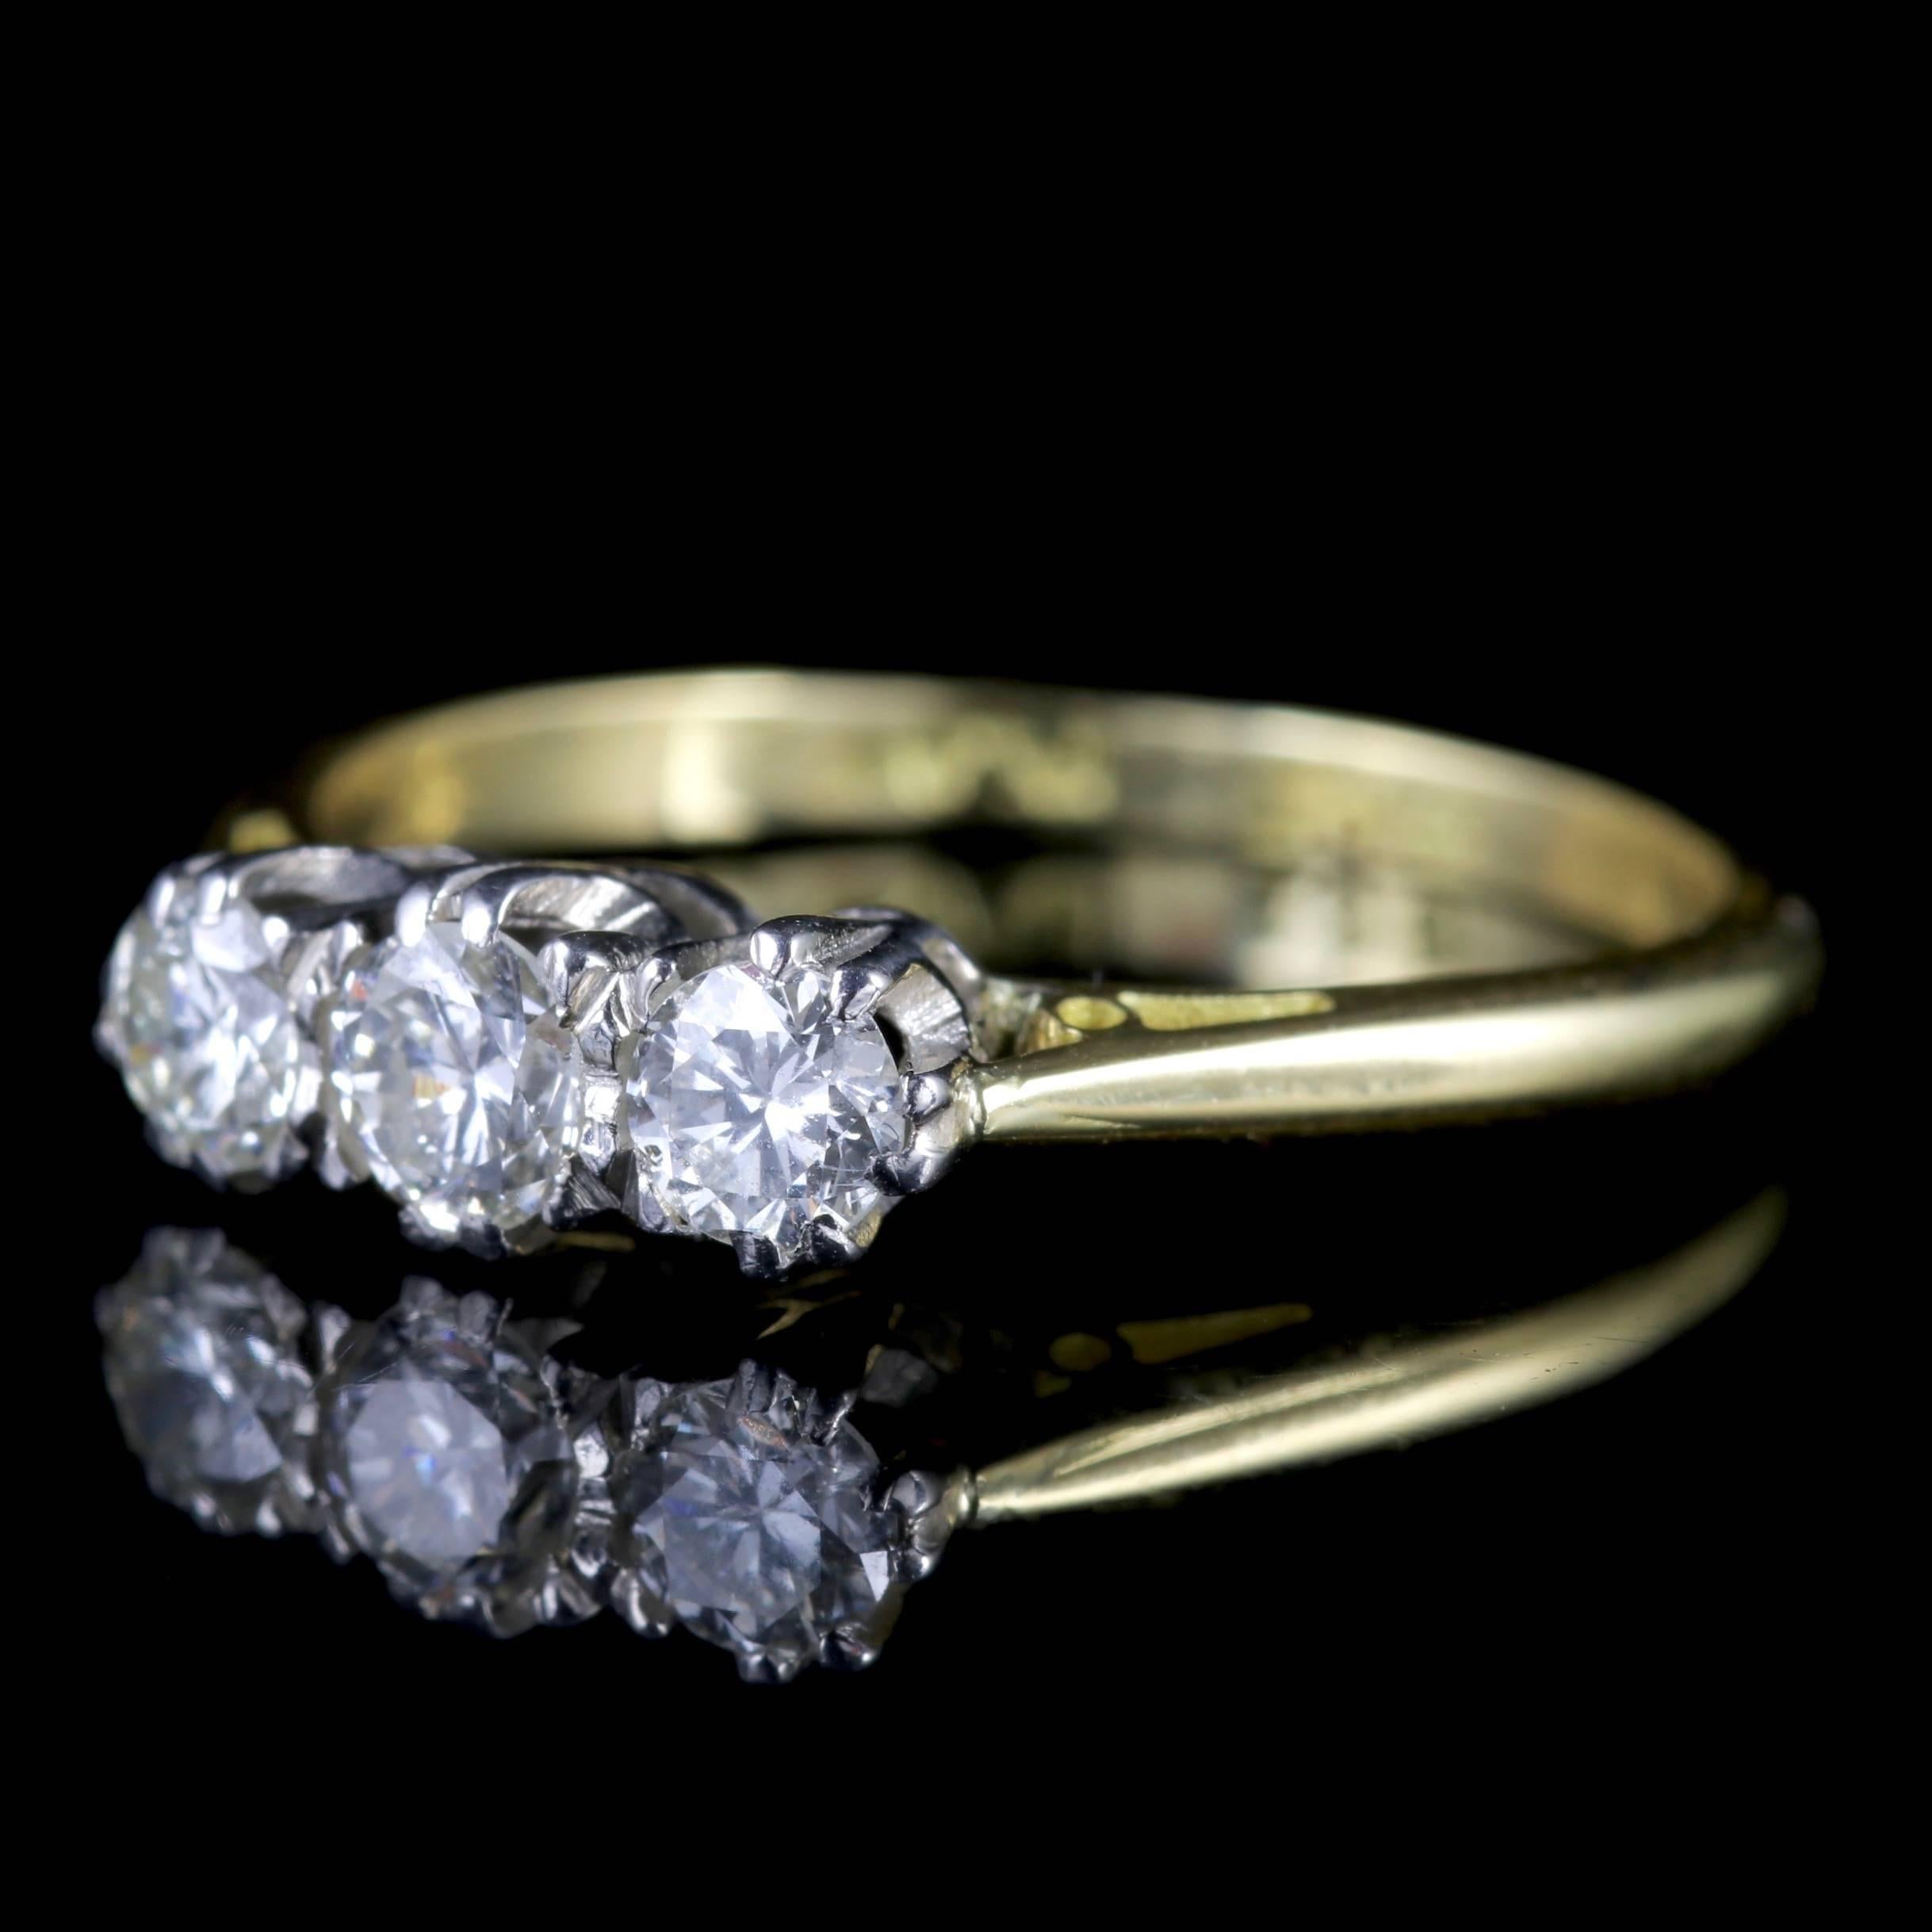 To read more please click continue reading below-

This fabulous antique Platinum and 18ct gold Edwardian Diamond trilogy ring is Circa 1910.

A trilogy of Diamonds adorns the ring representing past, present and future Or those 3 little words - I